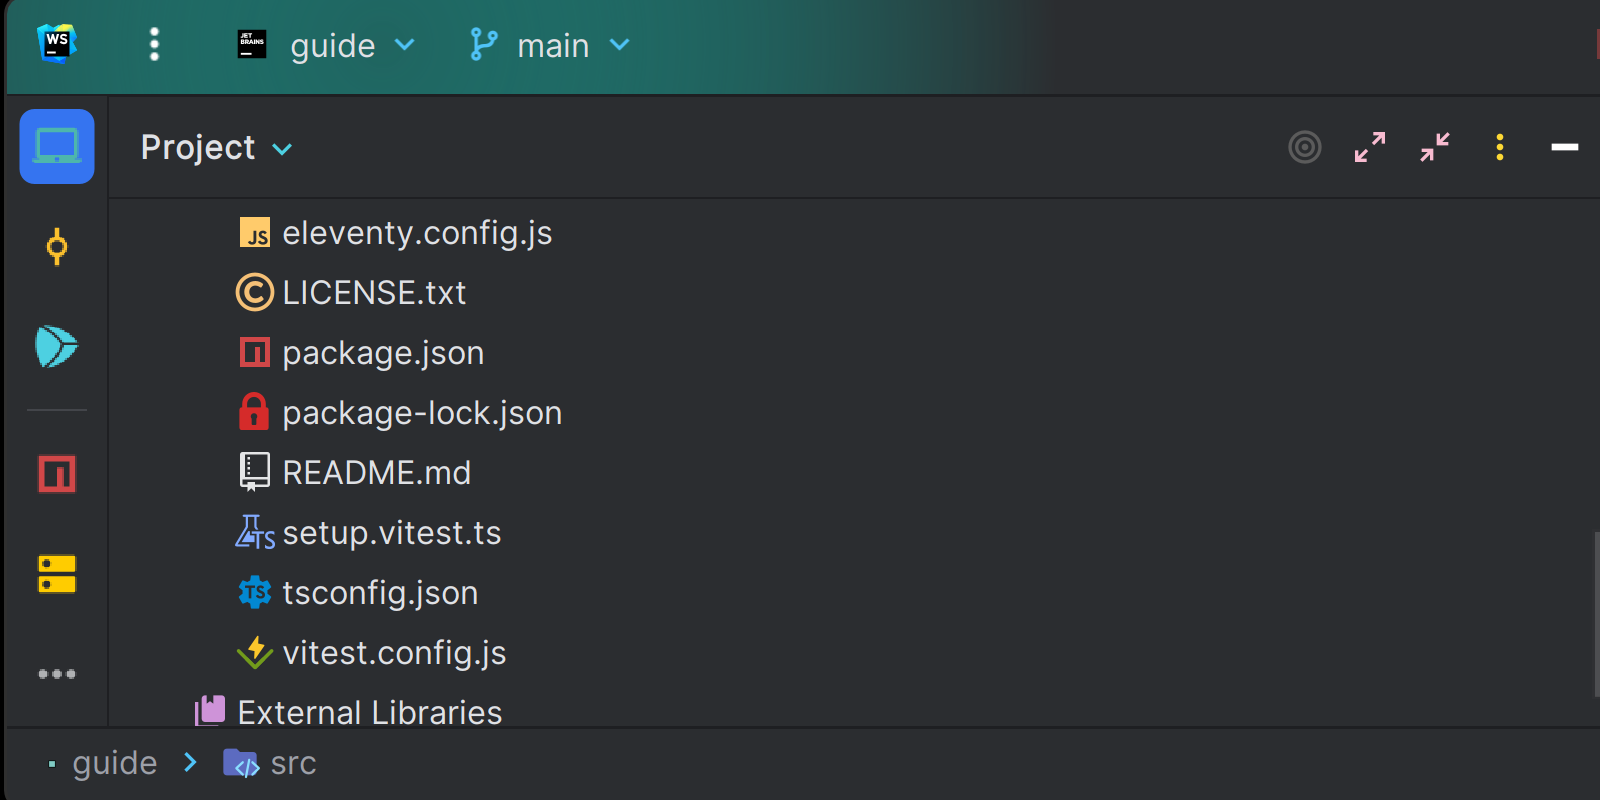 Atom Material Icons plugin installed shows the new icon set in the IDE.